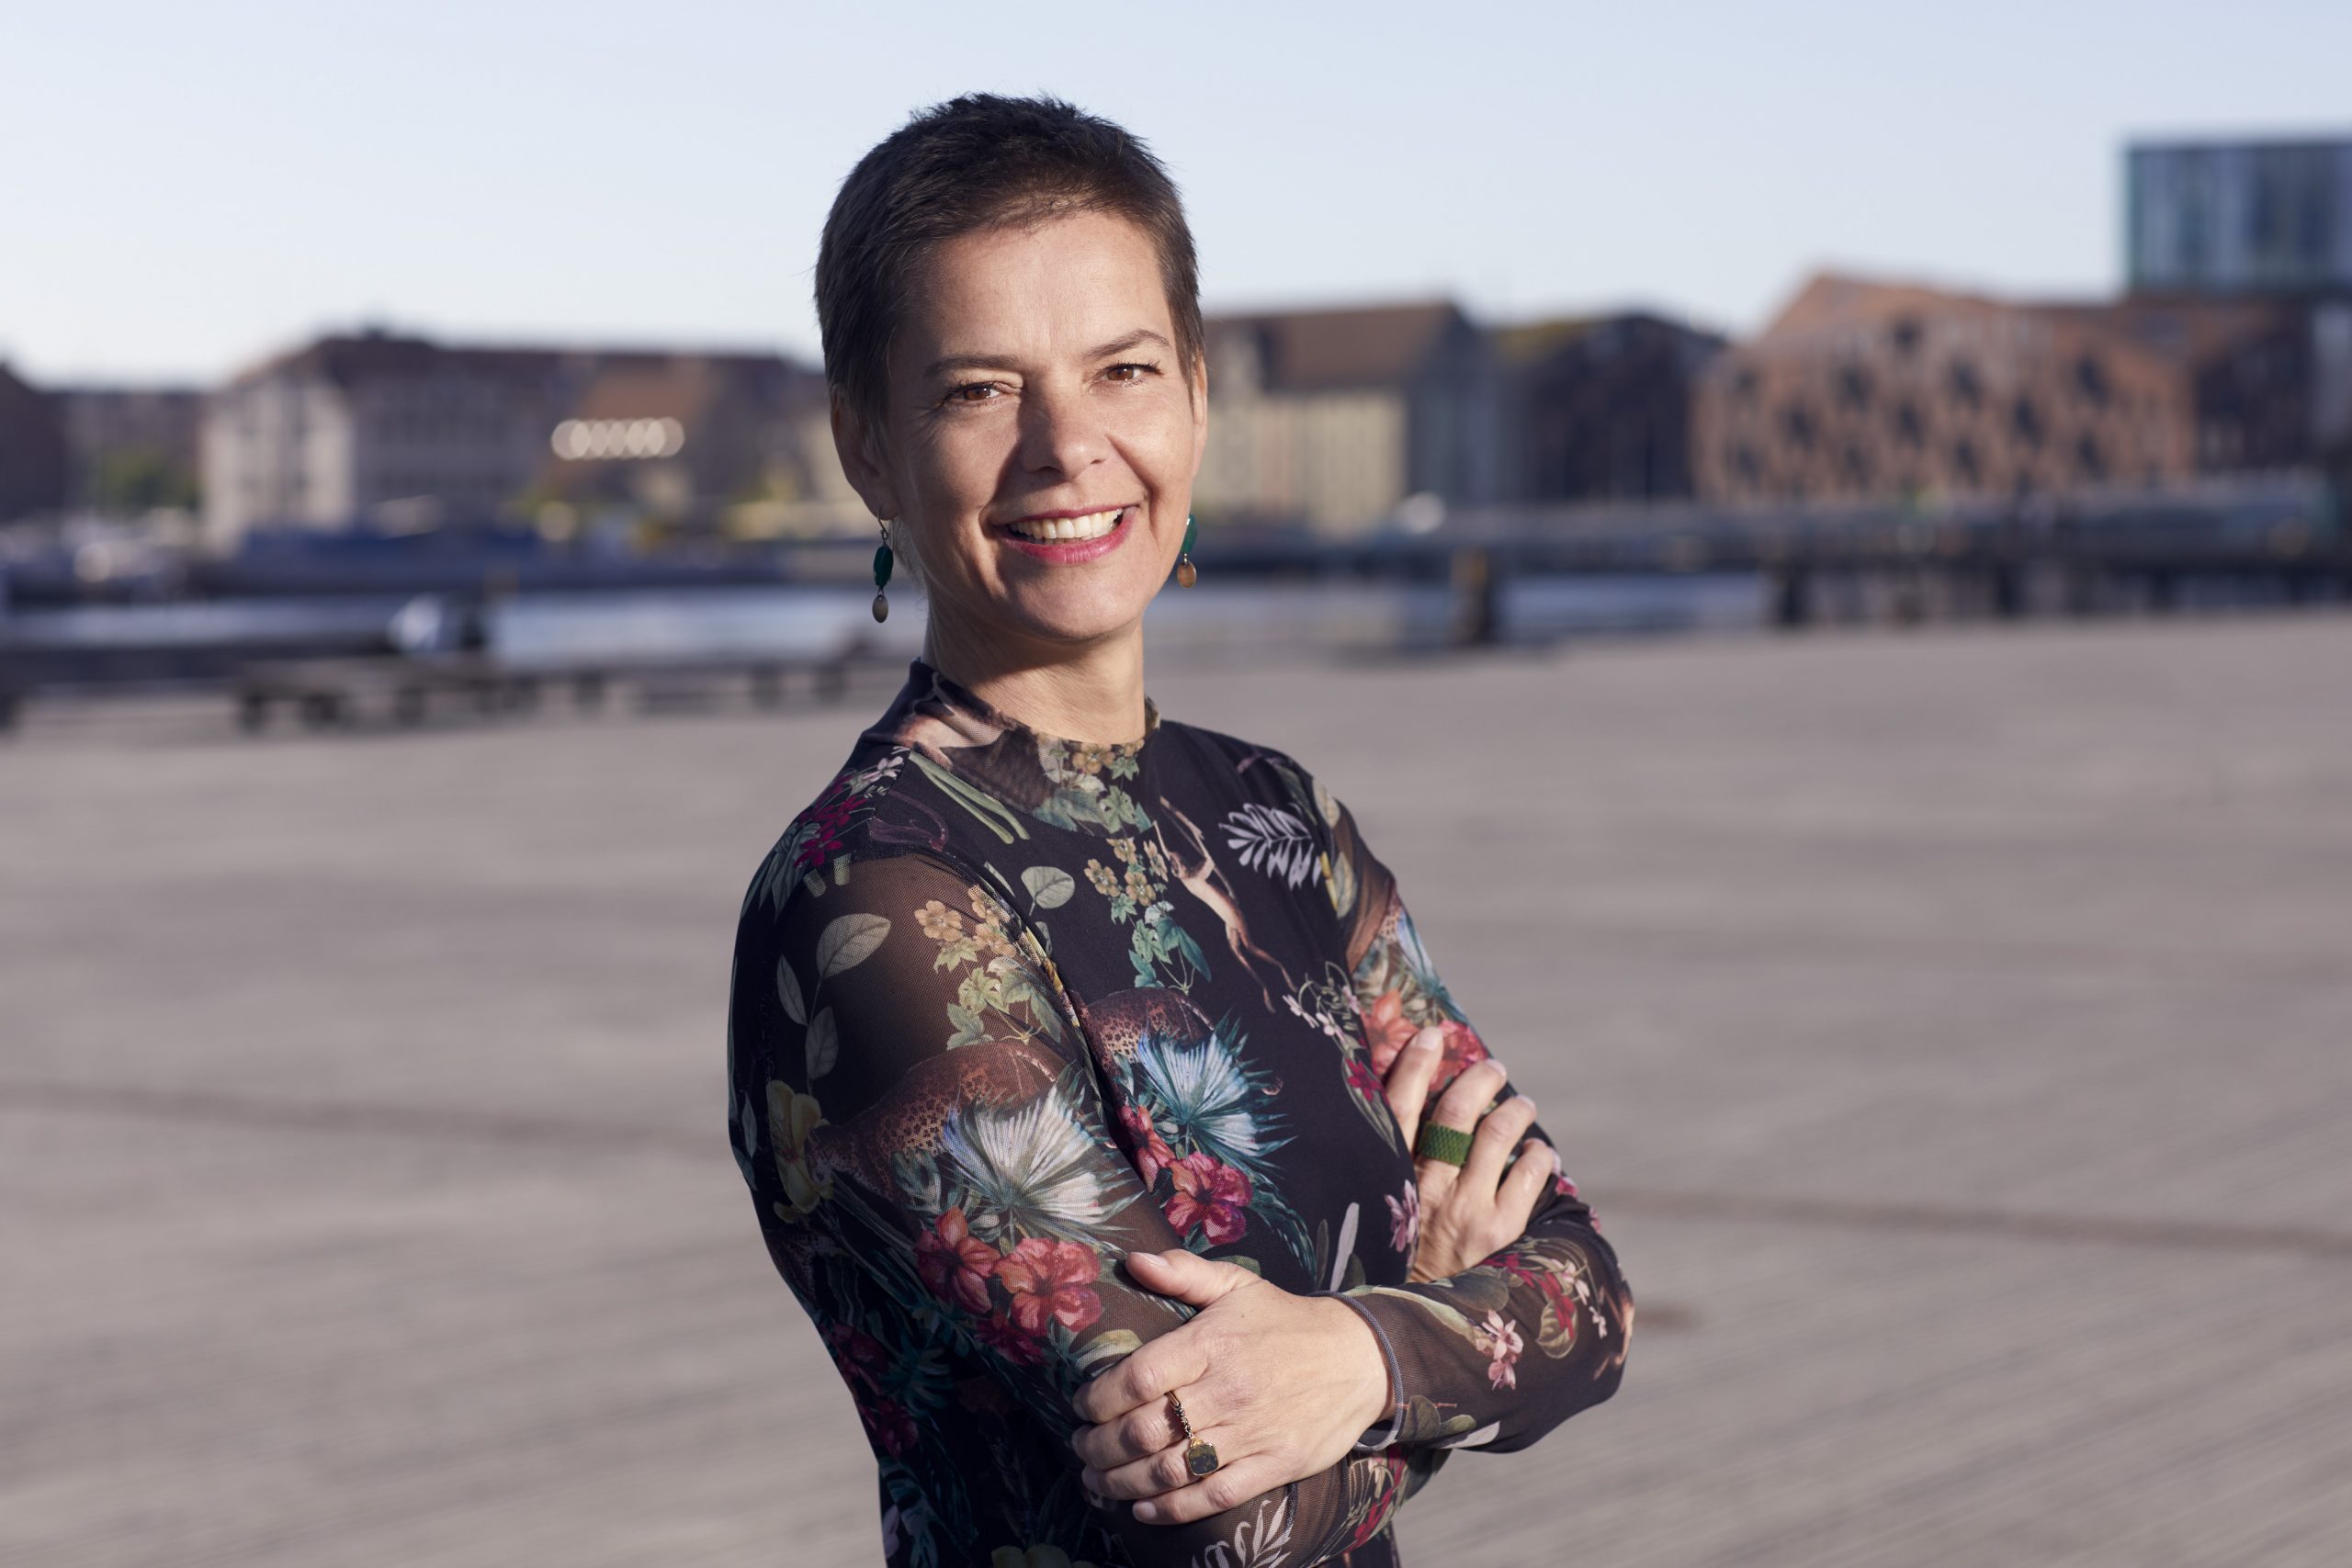 The Danish Woman with A Vision of Success